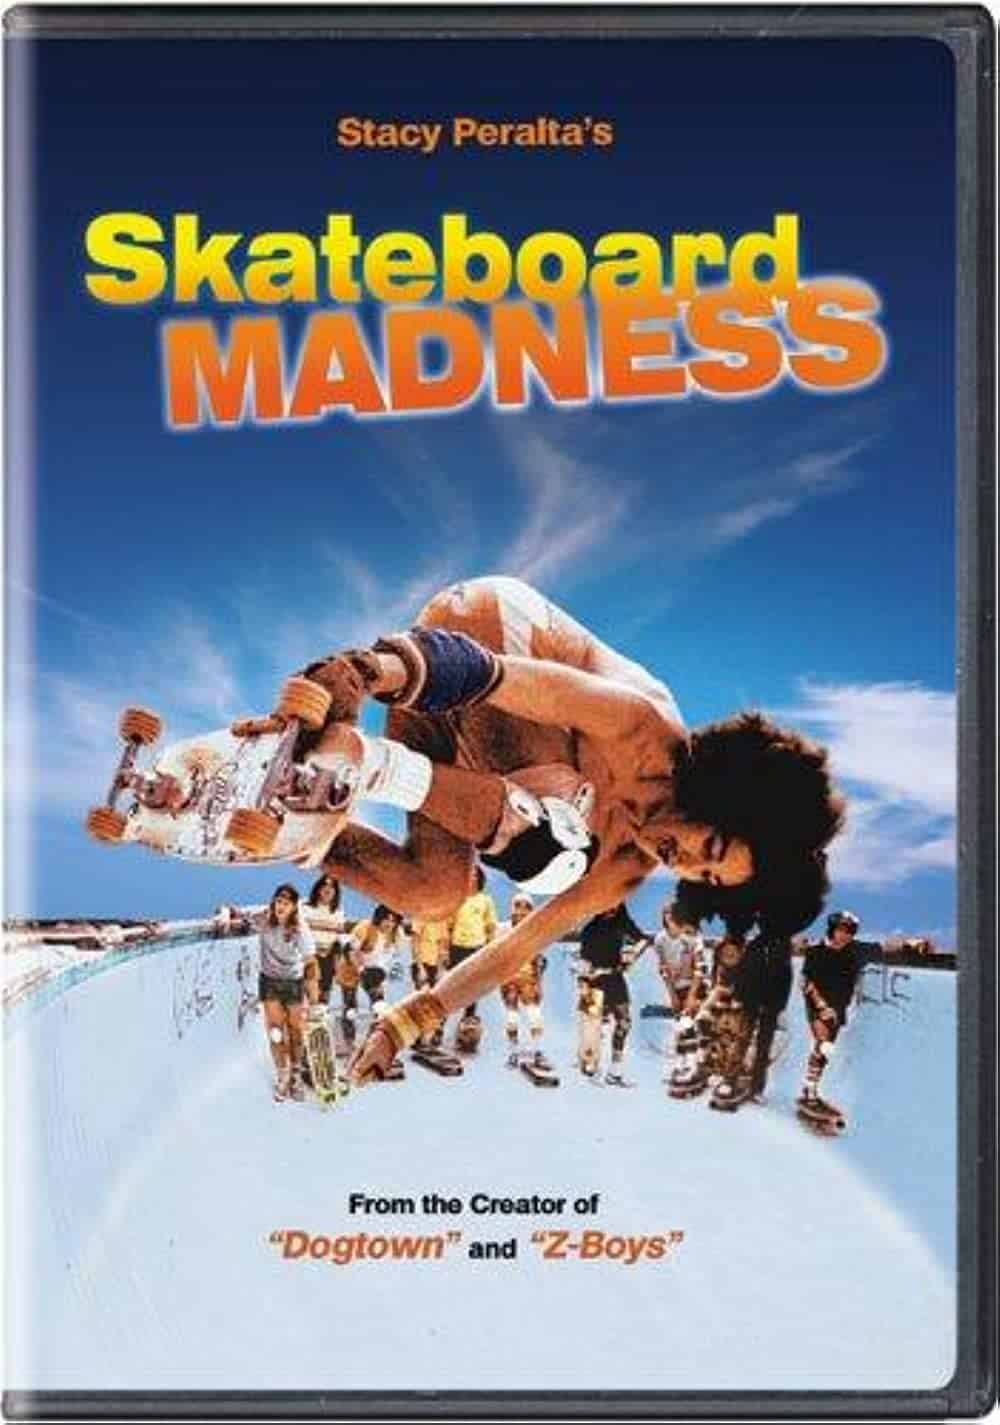 Skateboard Madness (1980) Best Skate Films to See This Weekend